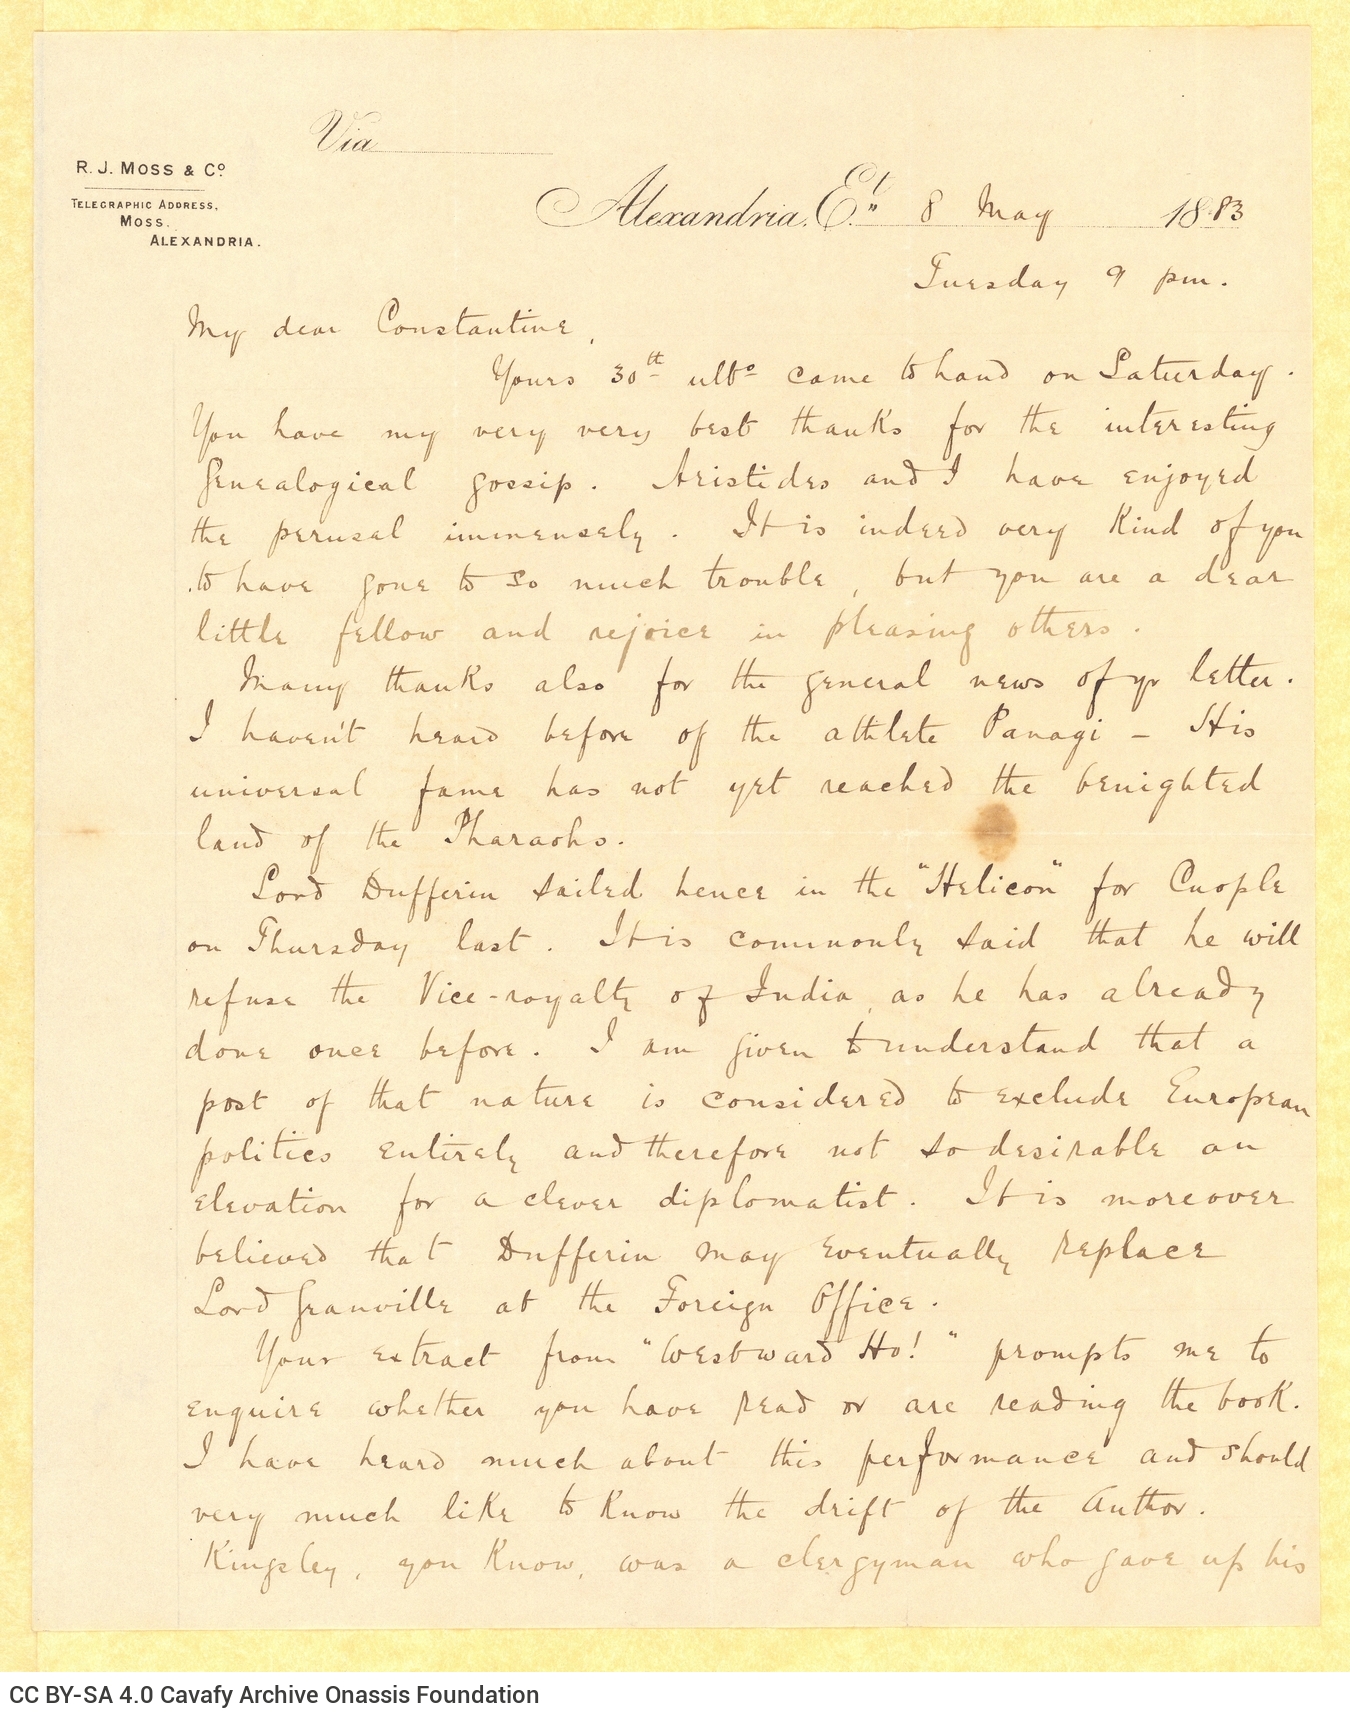 Handwritten letter by John Cavafy to C. P. Cavafy, in the first and third pages of a double sheet letterhead of R. J. Moss & 